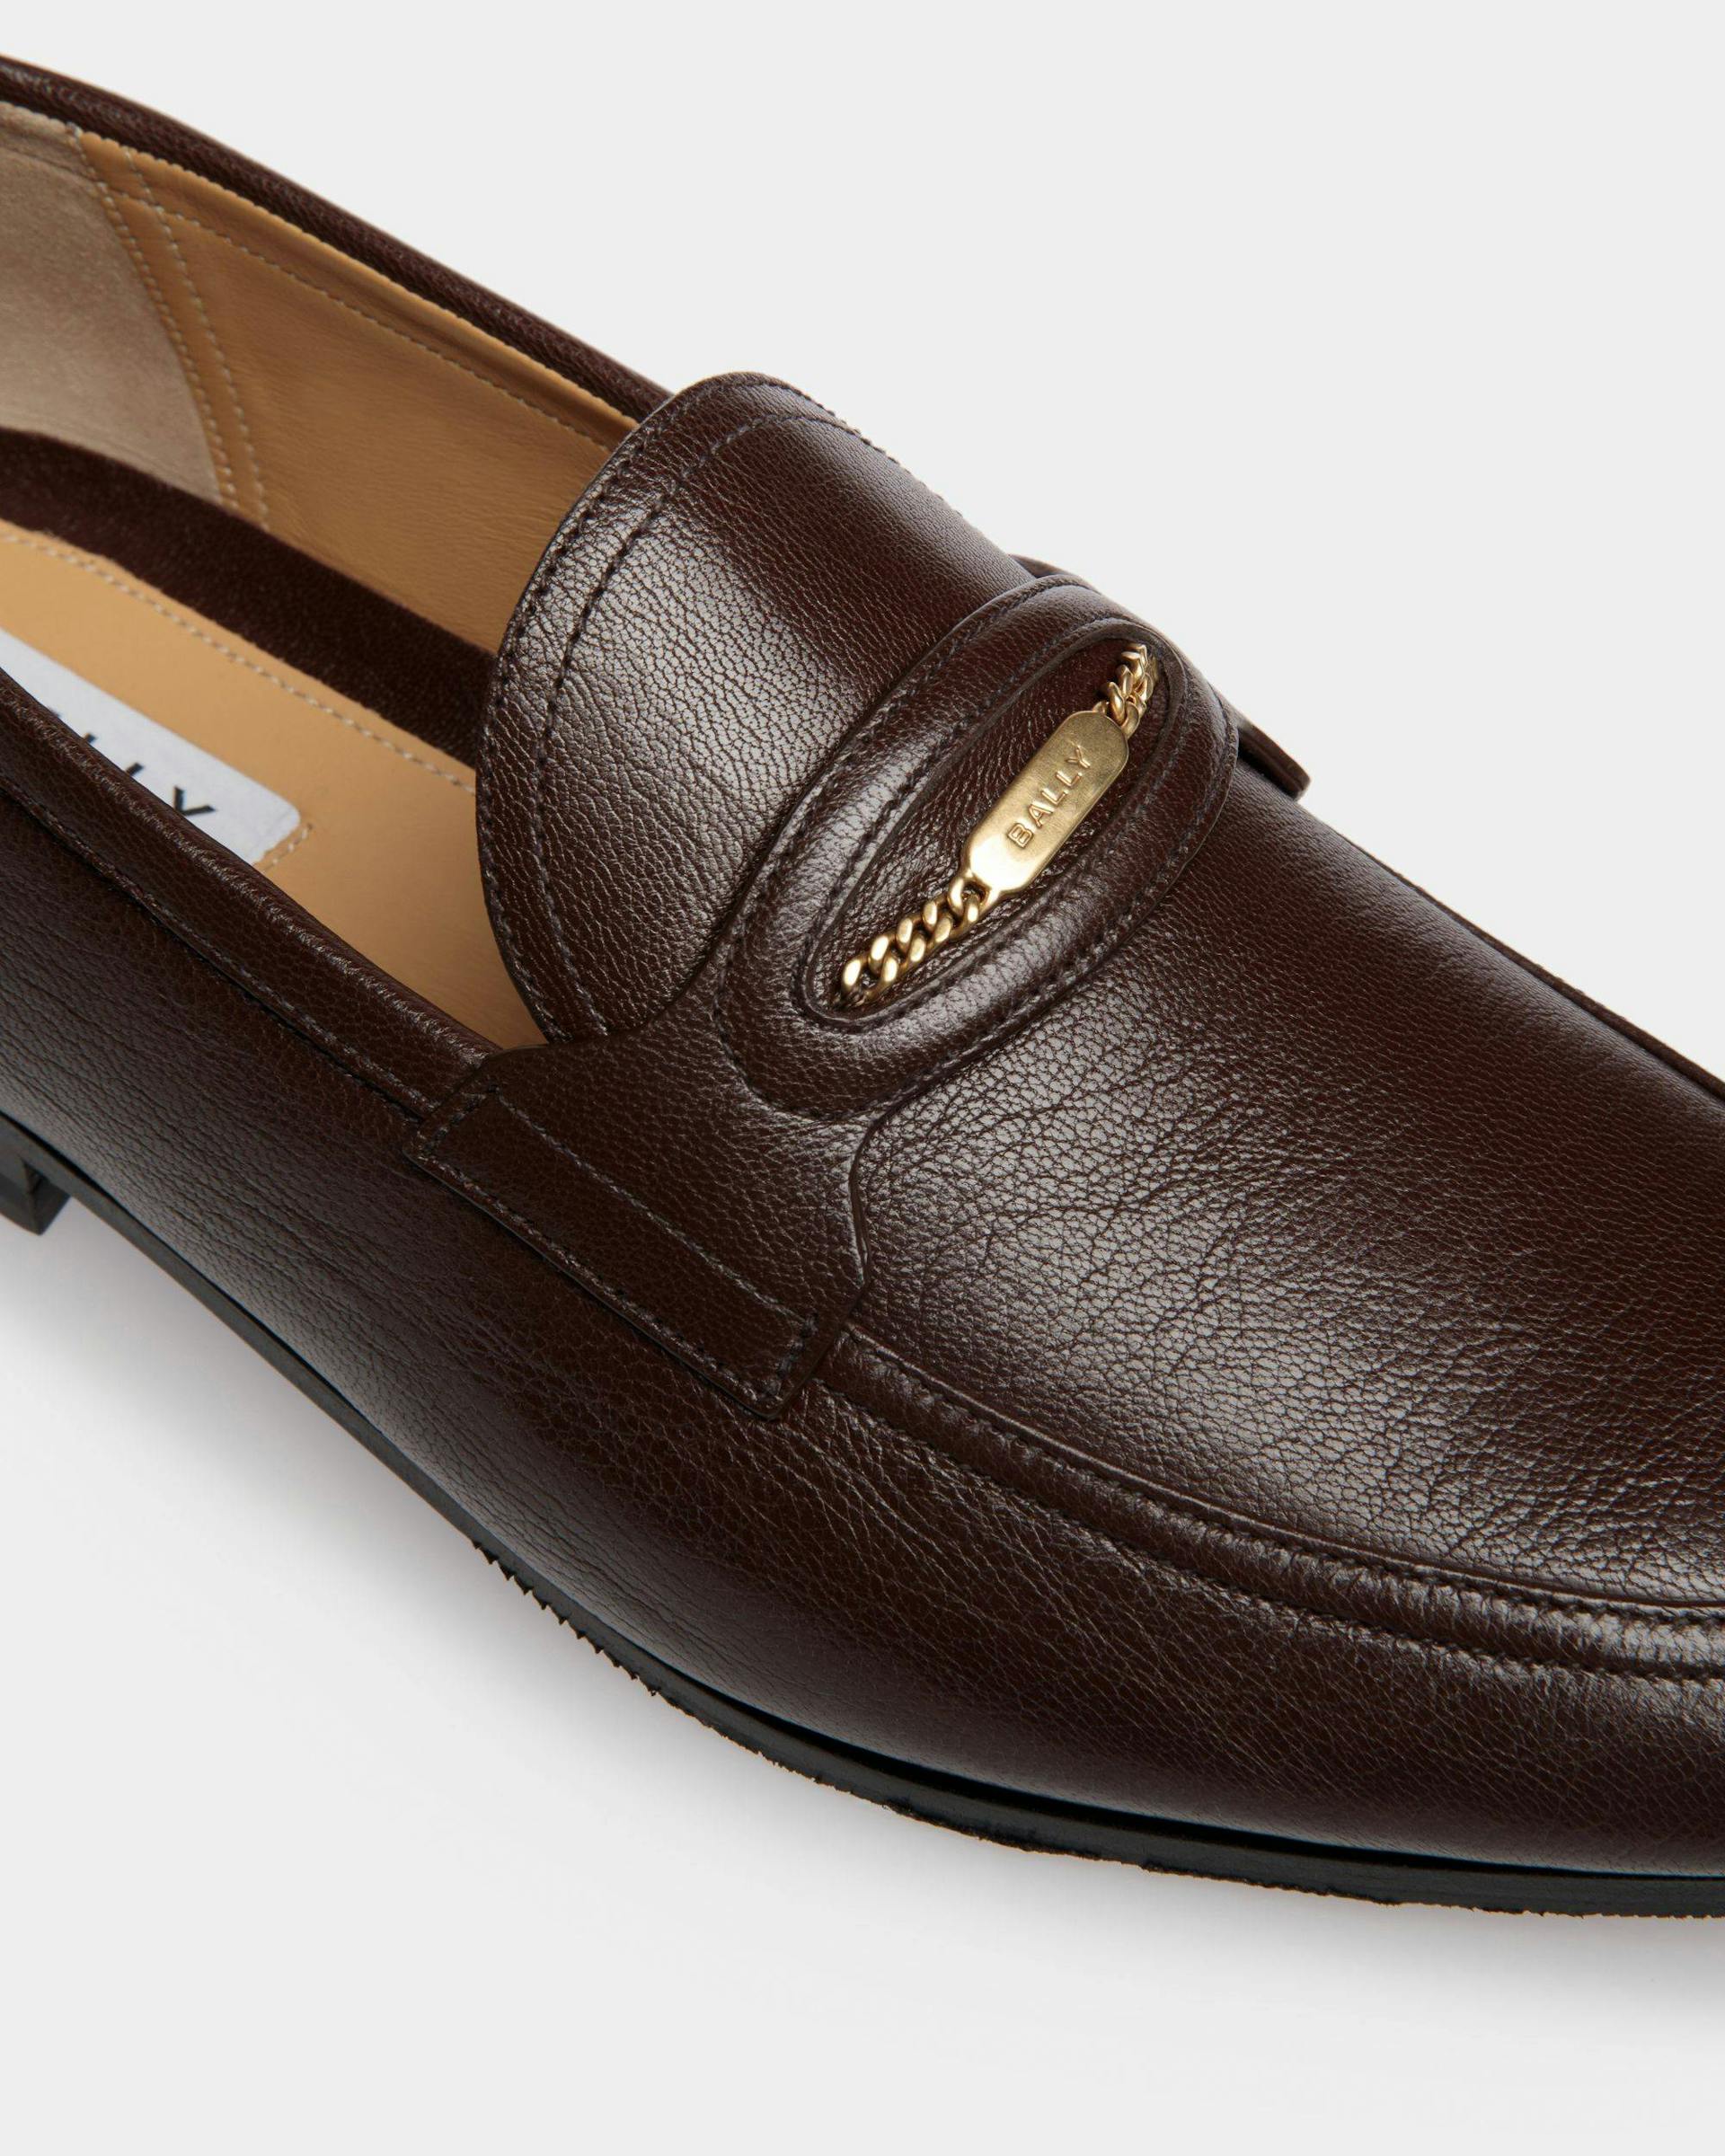 Men's Plume Loafer in Brown Grained Leather | Bally | Still Life Detail